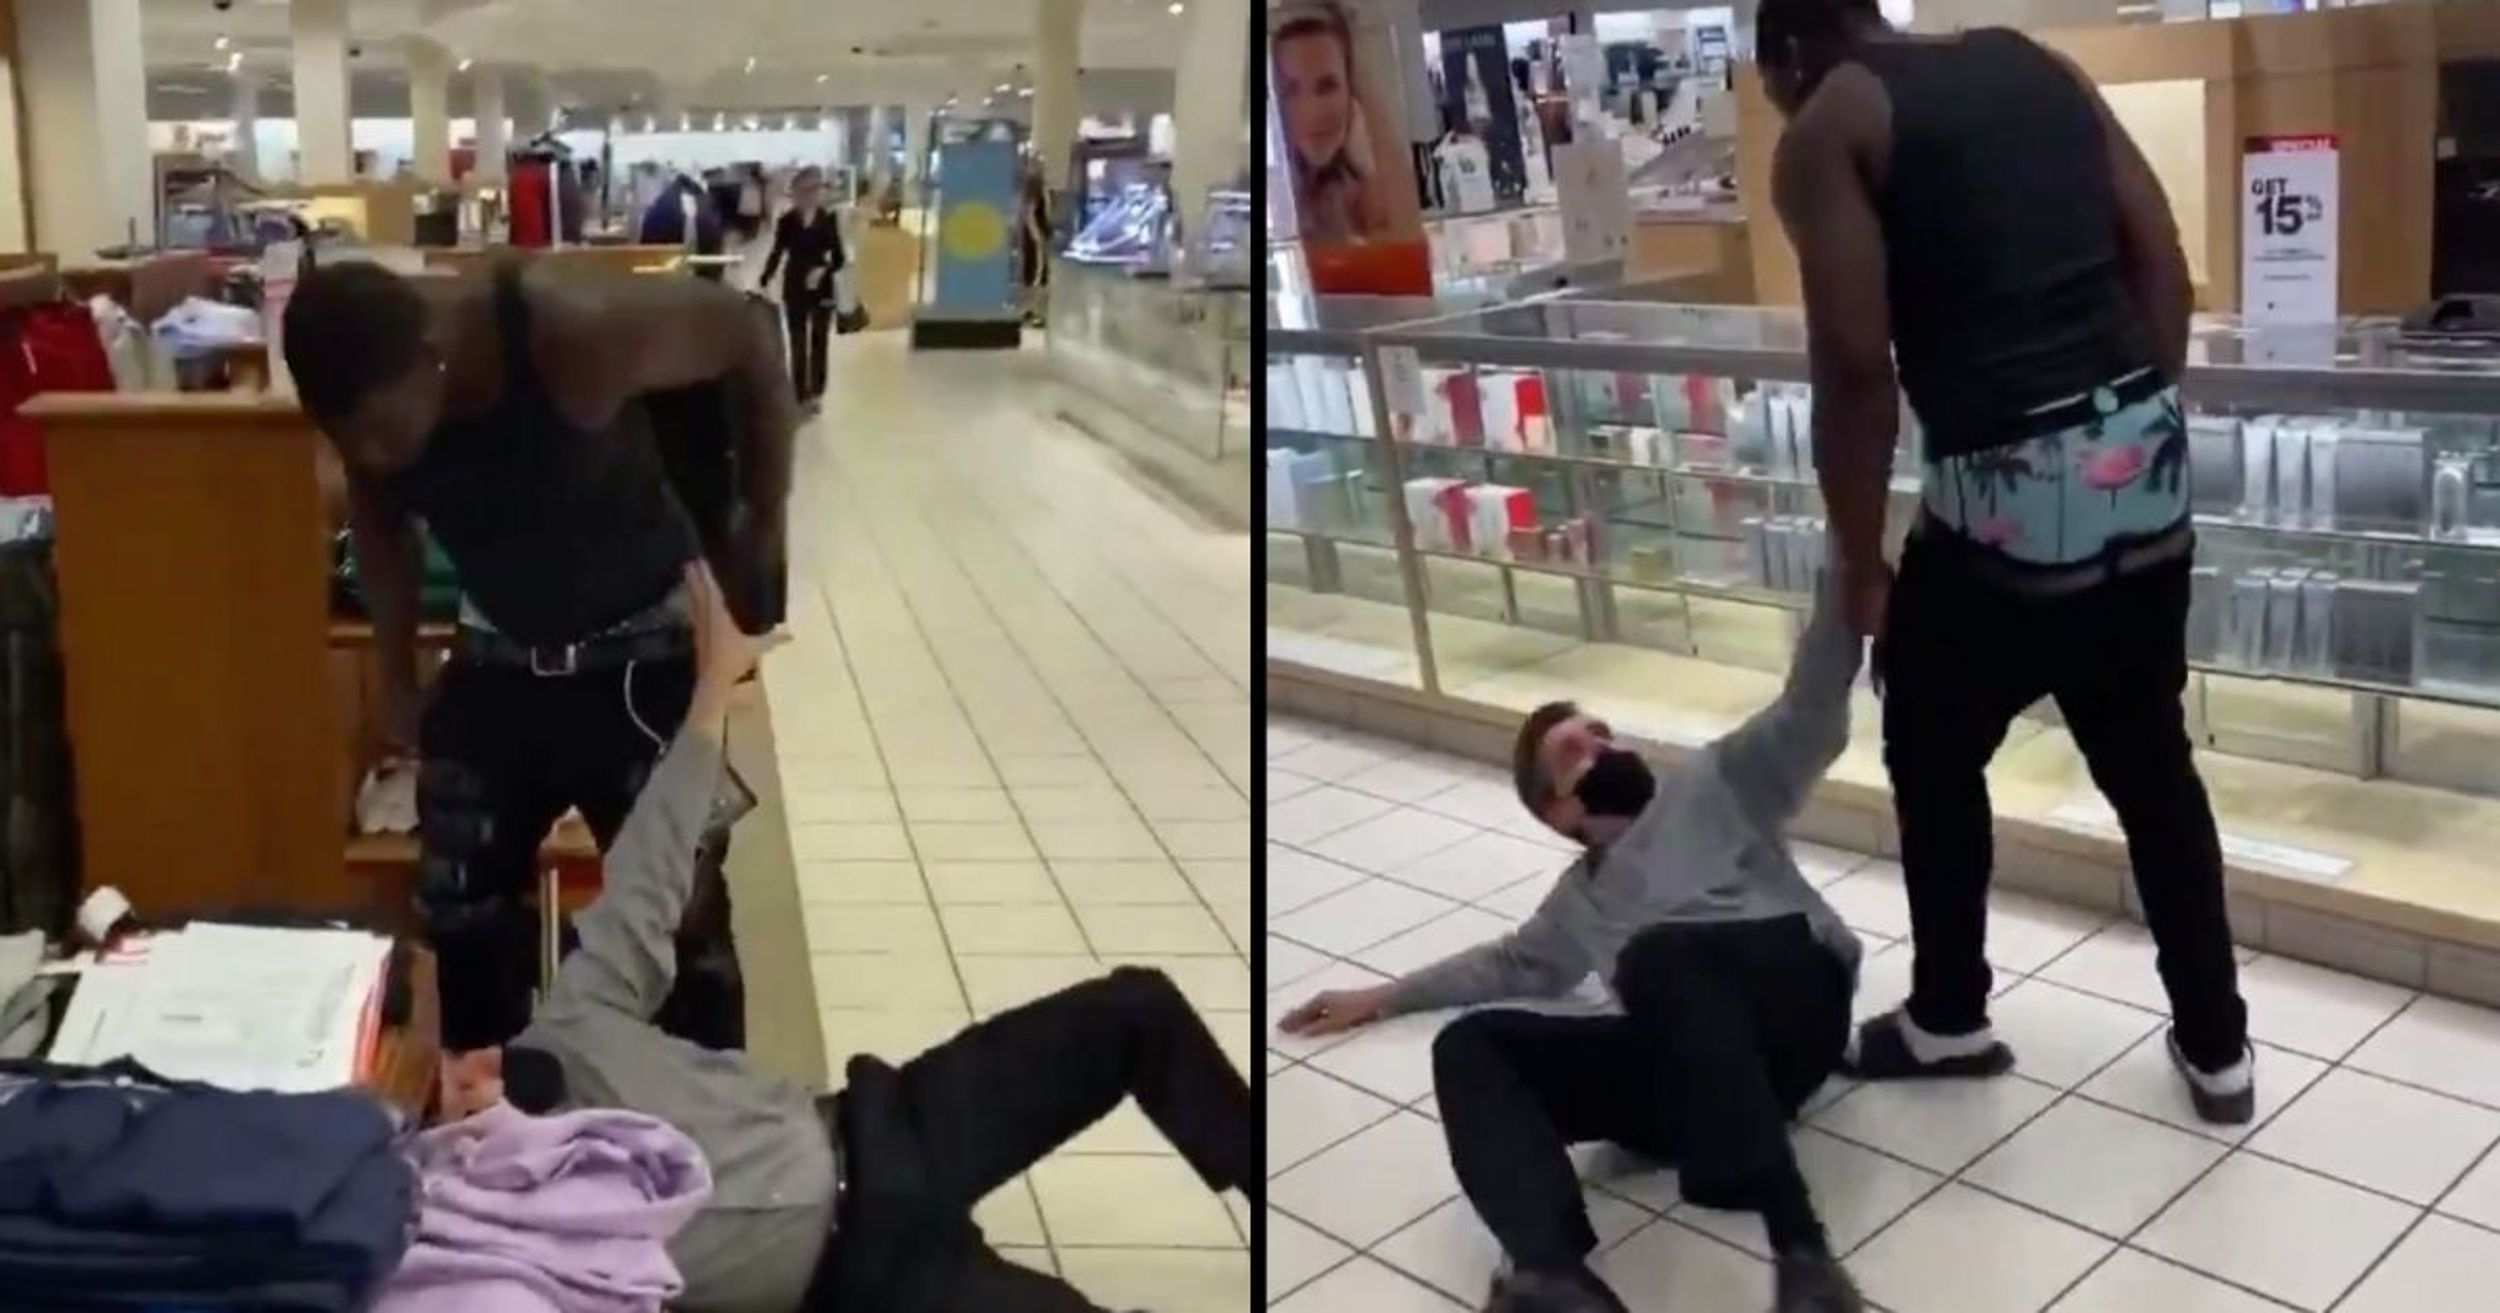 Police Investigating After Man Gets Pummeled In Michigan Macy's For Allegedly Calling Black Man A Racial Slur